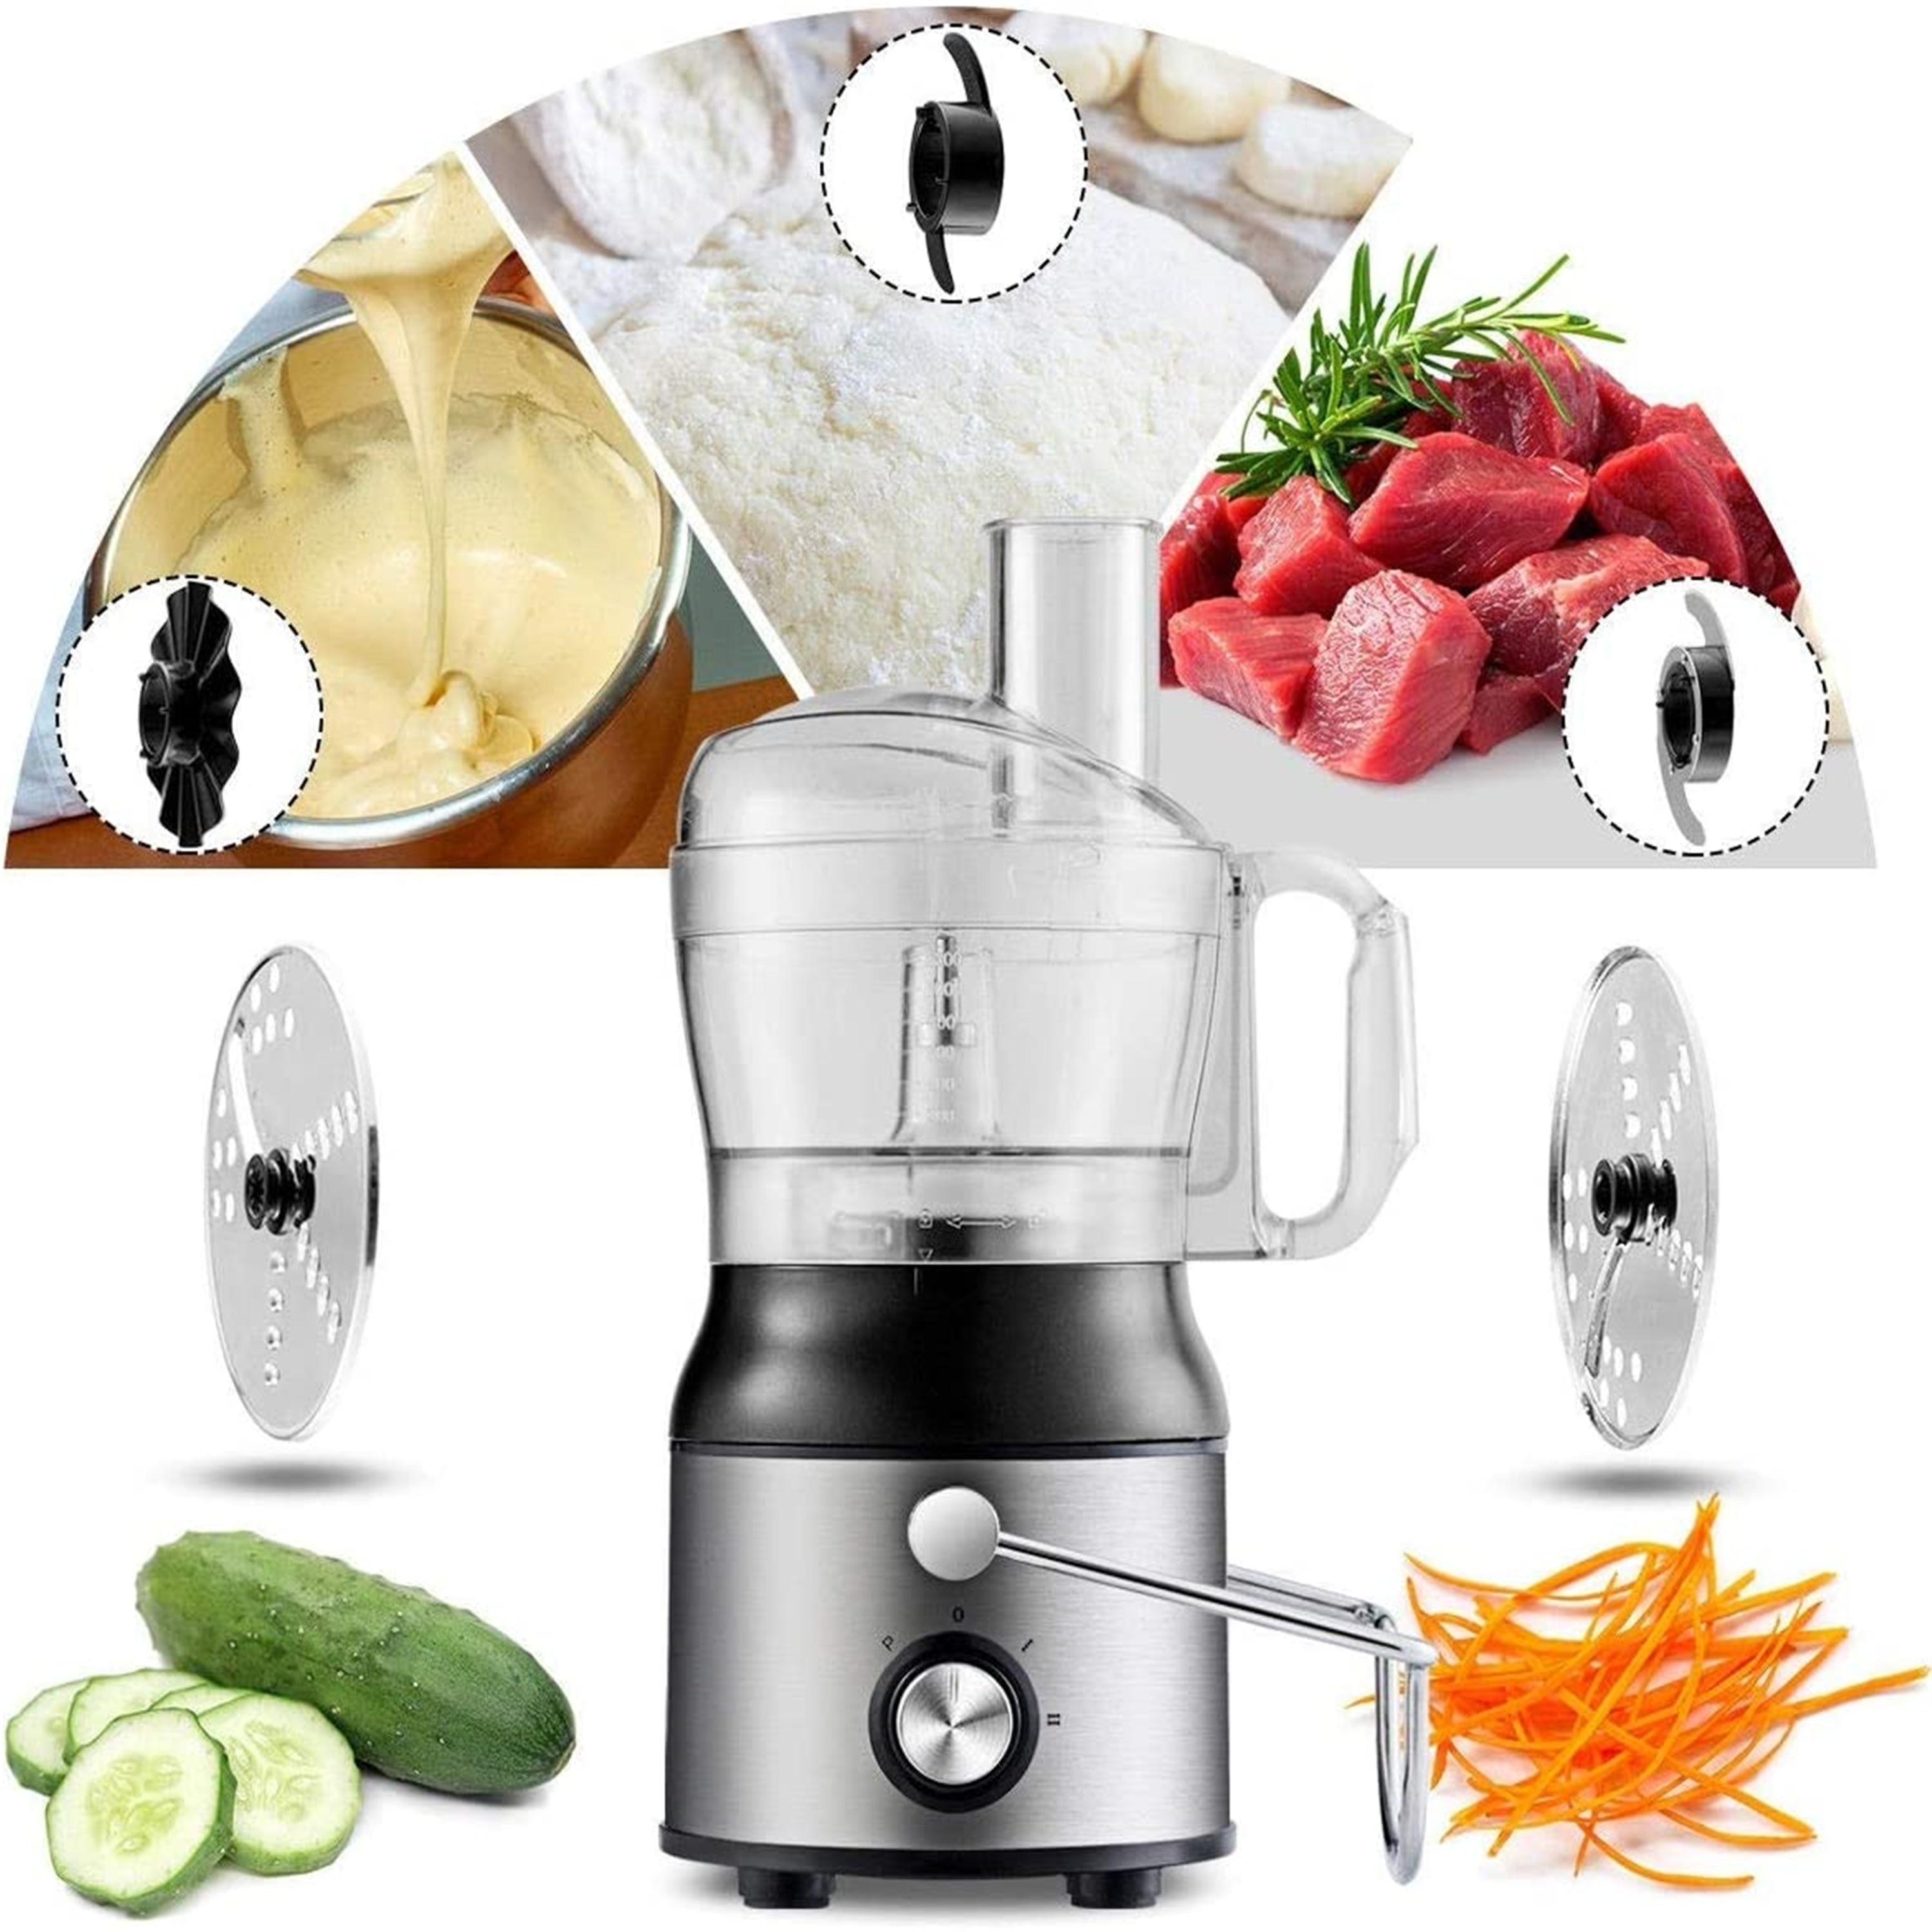 https://ak1.ostkcdn.com/images/products/is/images/direct/af07aa0b4f41863ee0a2425e006daabfbab118e1/Home-Kitchen-5-in-1-Multi-Function-Juice-Extractor-Blender-Grinder-Chopper-Food-Processor.jpg